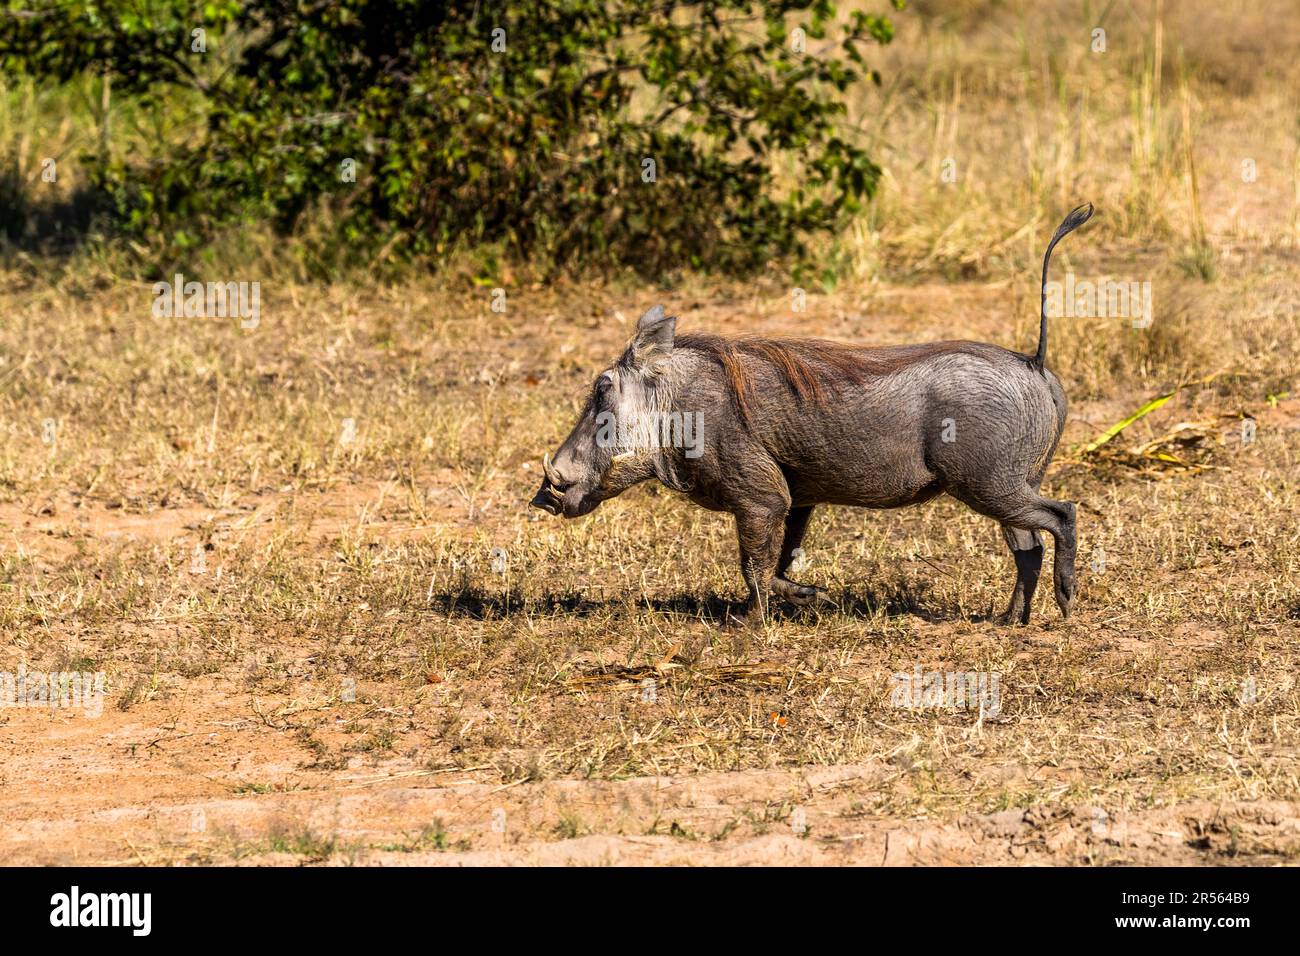 Warthog in Liwonde National Park, Malawi. At the sight of warthogs, many tourists burst into delight and call out to Pumbaa. The characterful warthog plays a supporting role in Walt Disney's Jungle Book as well as in The Lion King Stock Photo